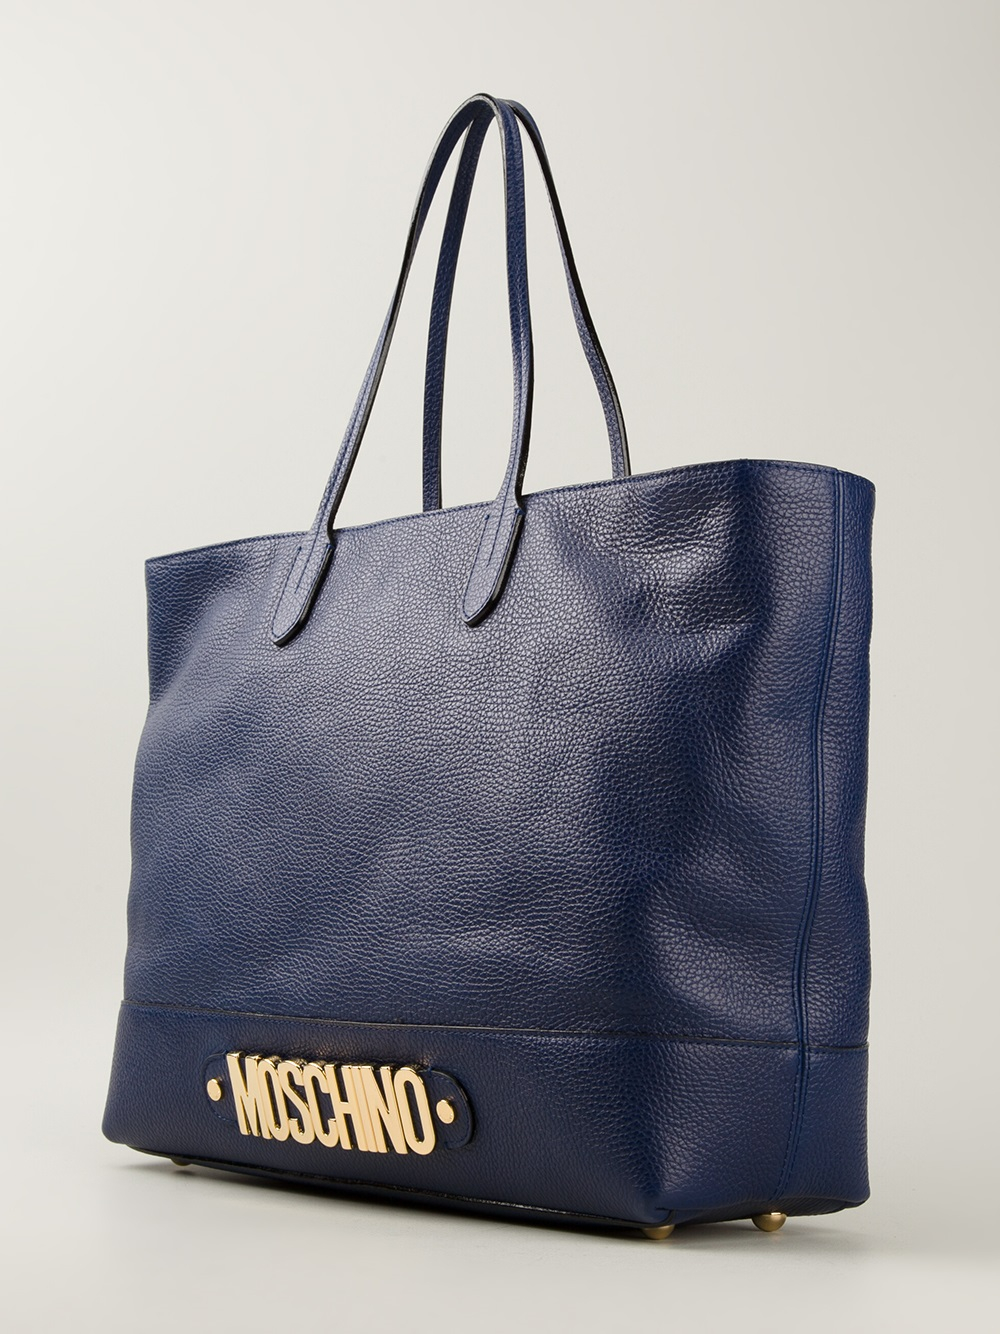 Moschino Large Tote Bag in Blue - Lyst